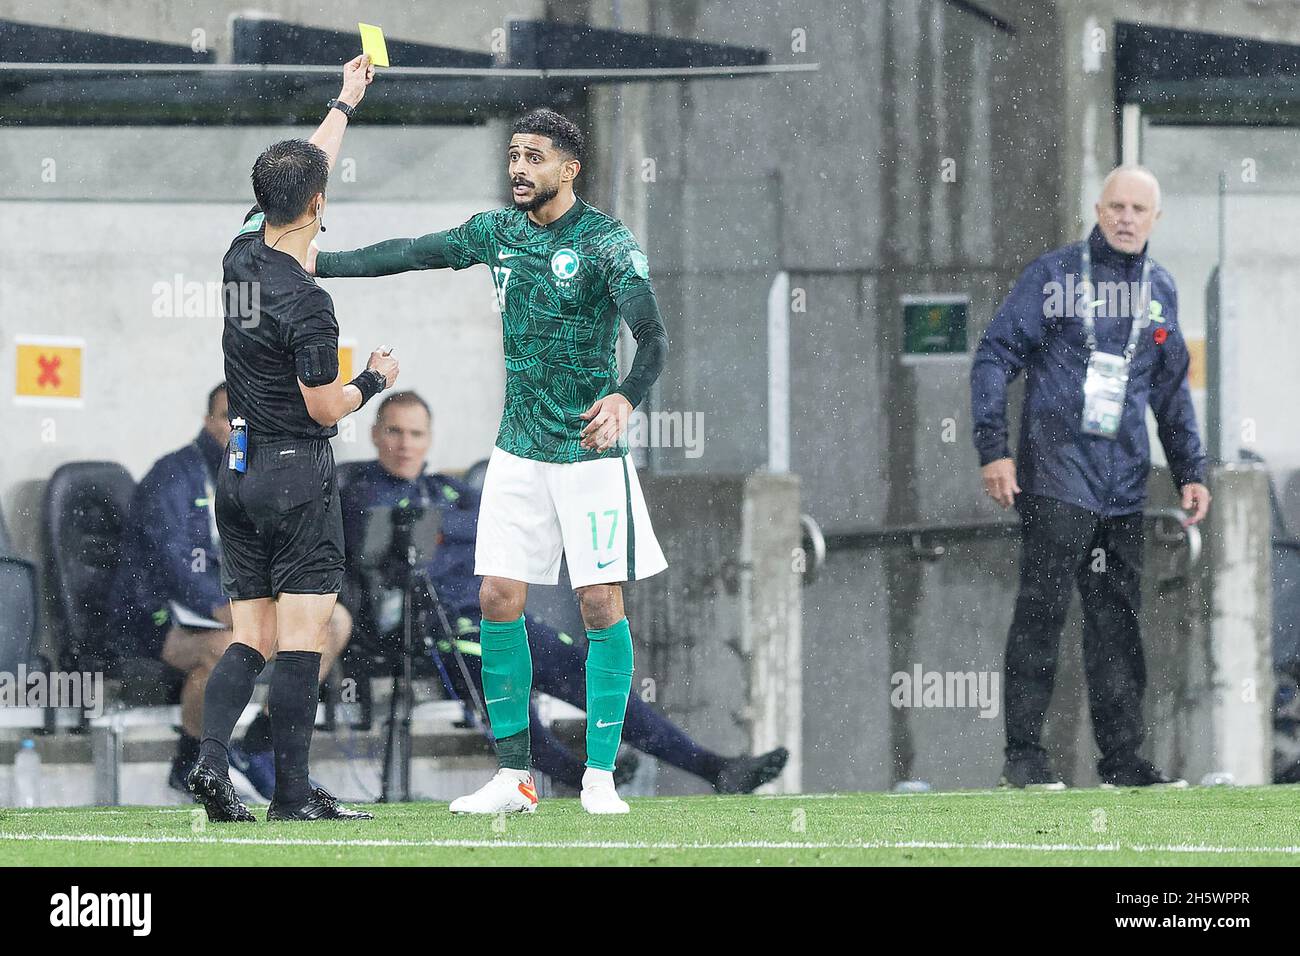 Sydney, Australia. 11th Nov, 2021. The referee gives ABDULELAH ALAMRI of Saudi Arabia a yellow card during the FIFA World Cup AFC Asian Qualifier match between the Australia Socceroos and Saudi Arabia at CommBank Stadium on November 11, 2021 in Sydney, Australia Credit: IOIO IMAGES/Alamy Live News Stock Photo